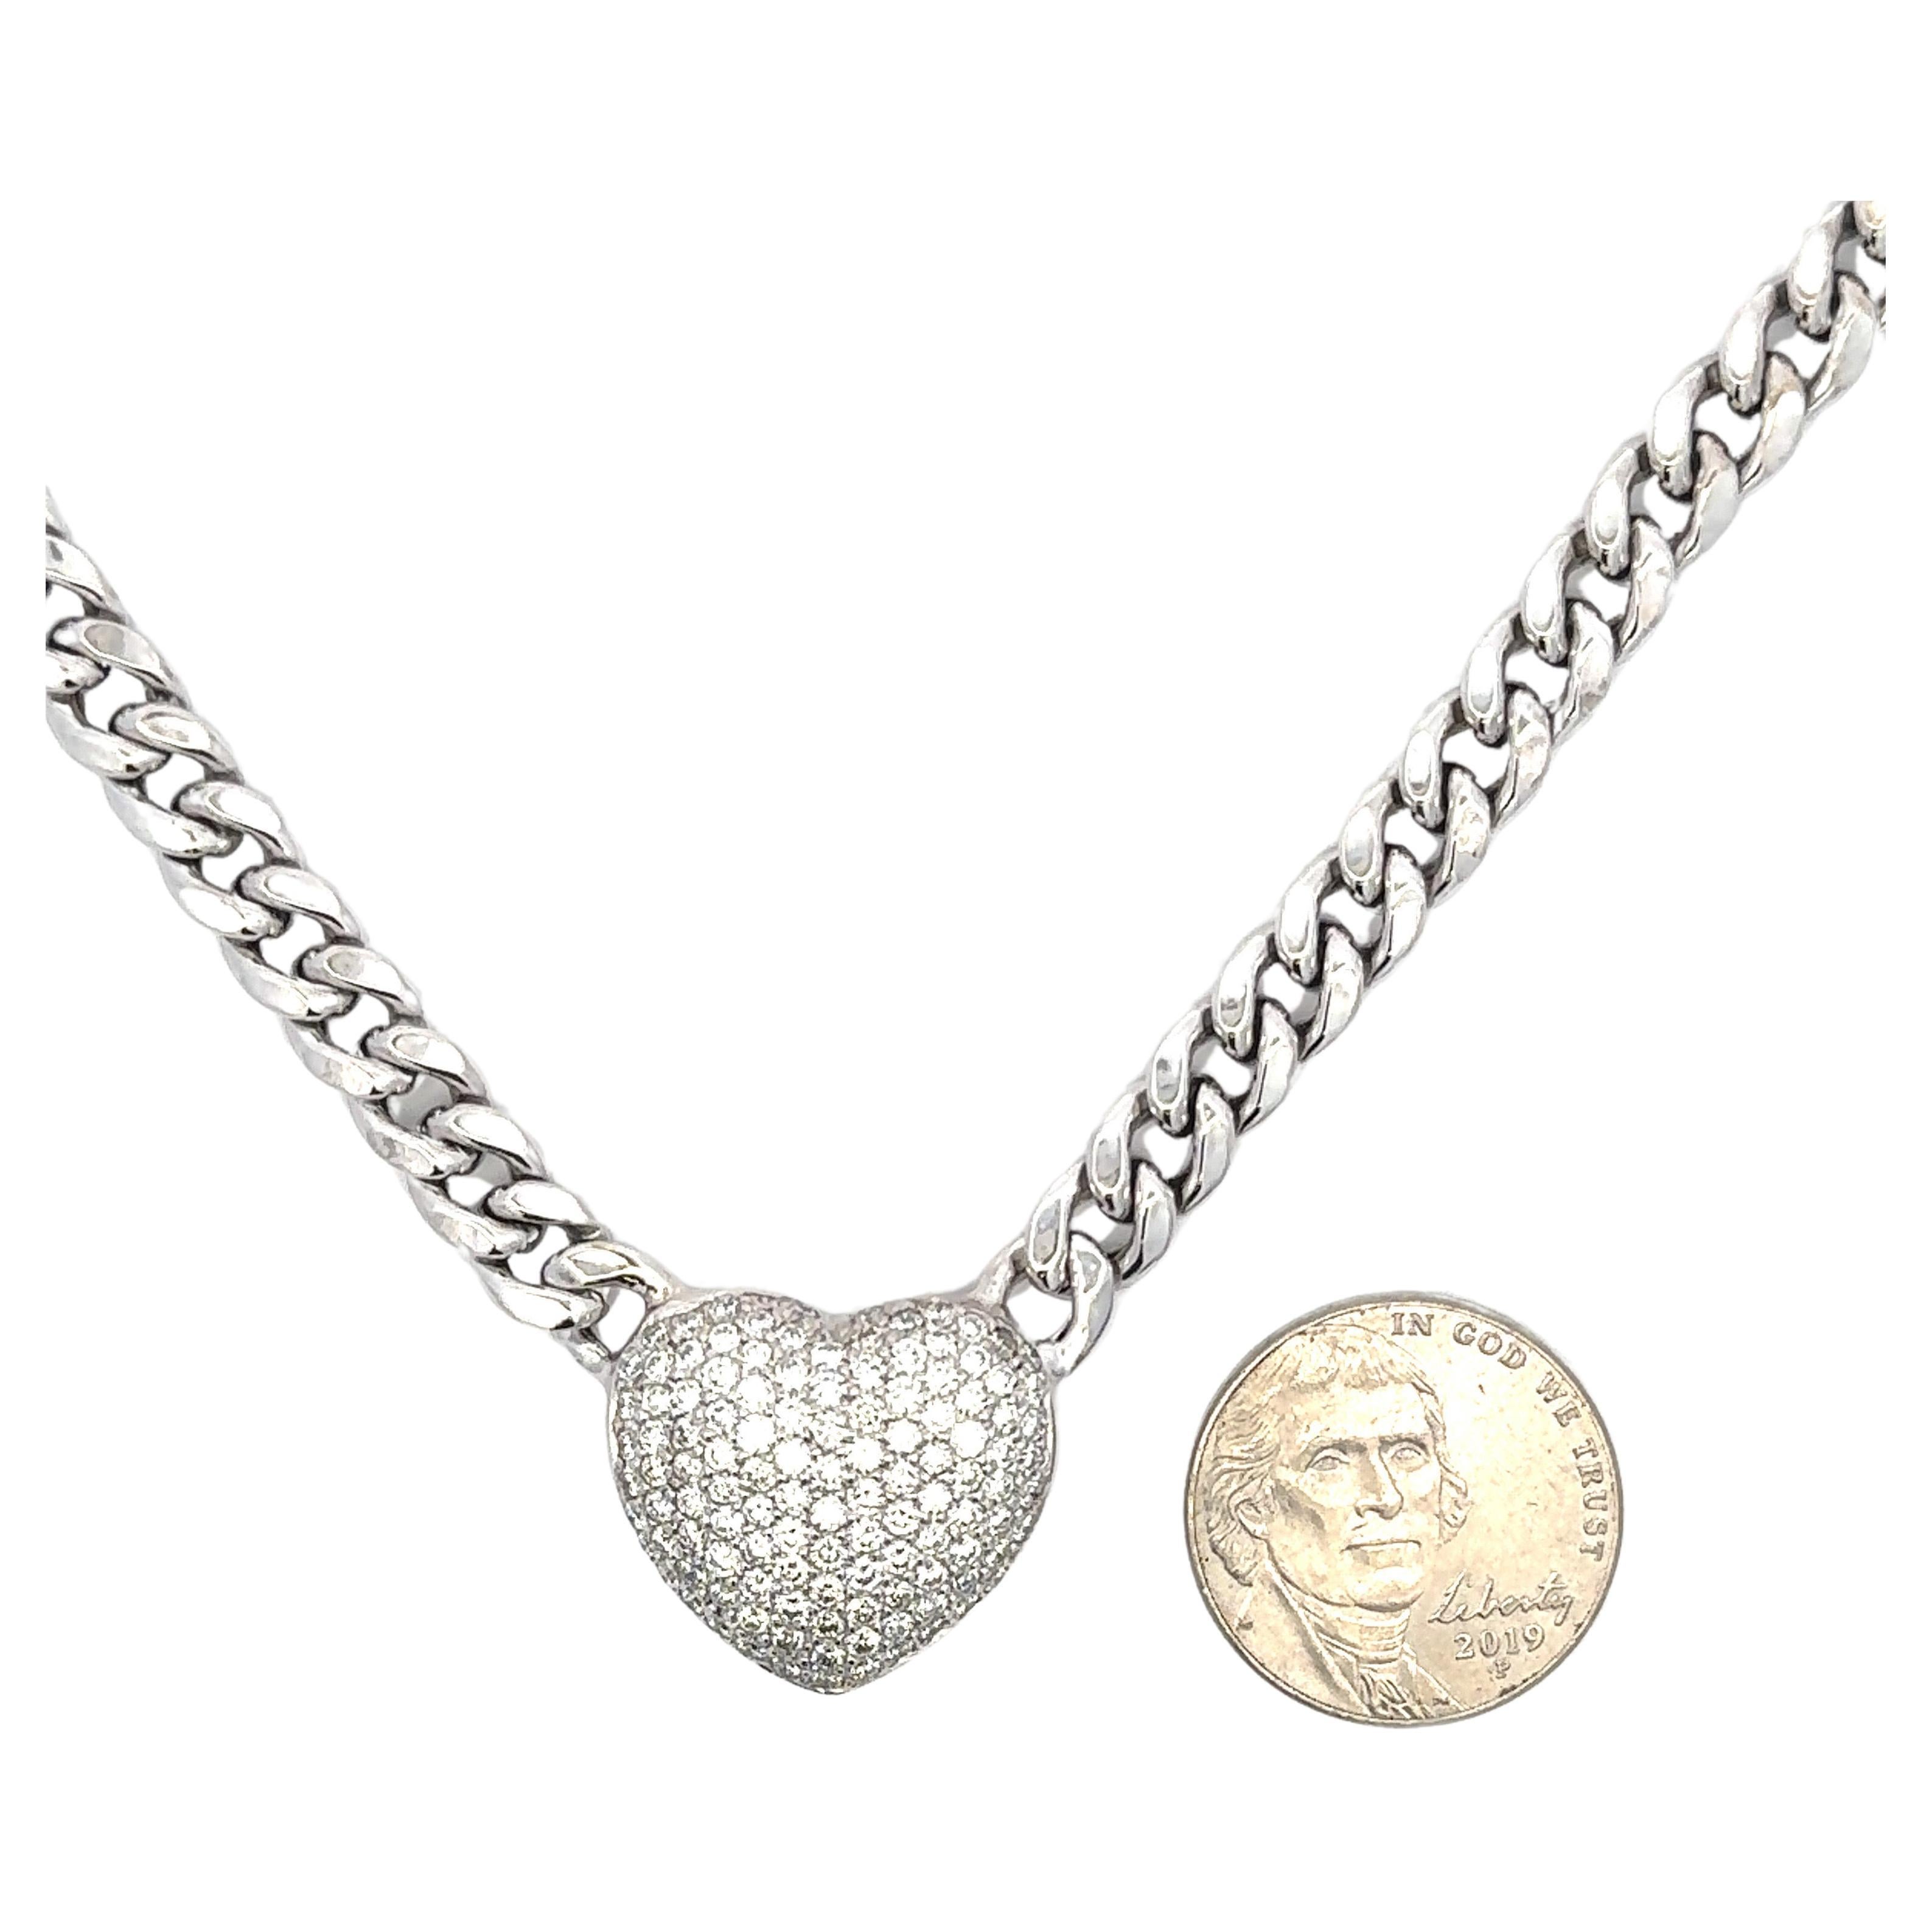 Fashionable puffed heart pendant featuring 118 pave diamonds weighing 2.30 carats on a Cuban link necklace weighing 30.38 grams.
Available in yellow gold. 
